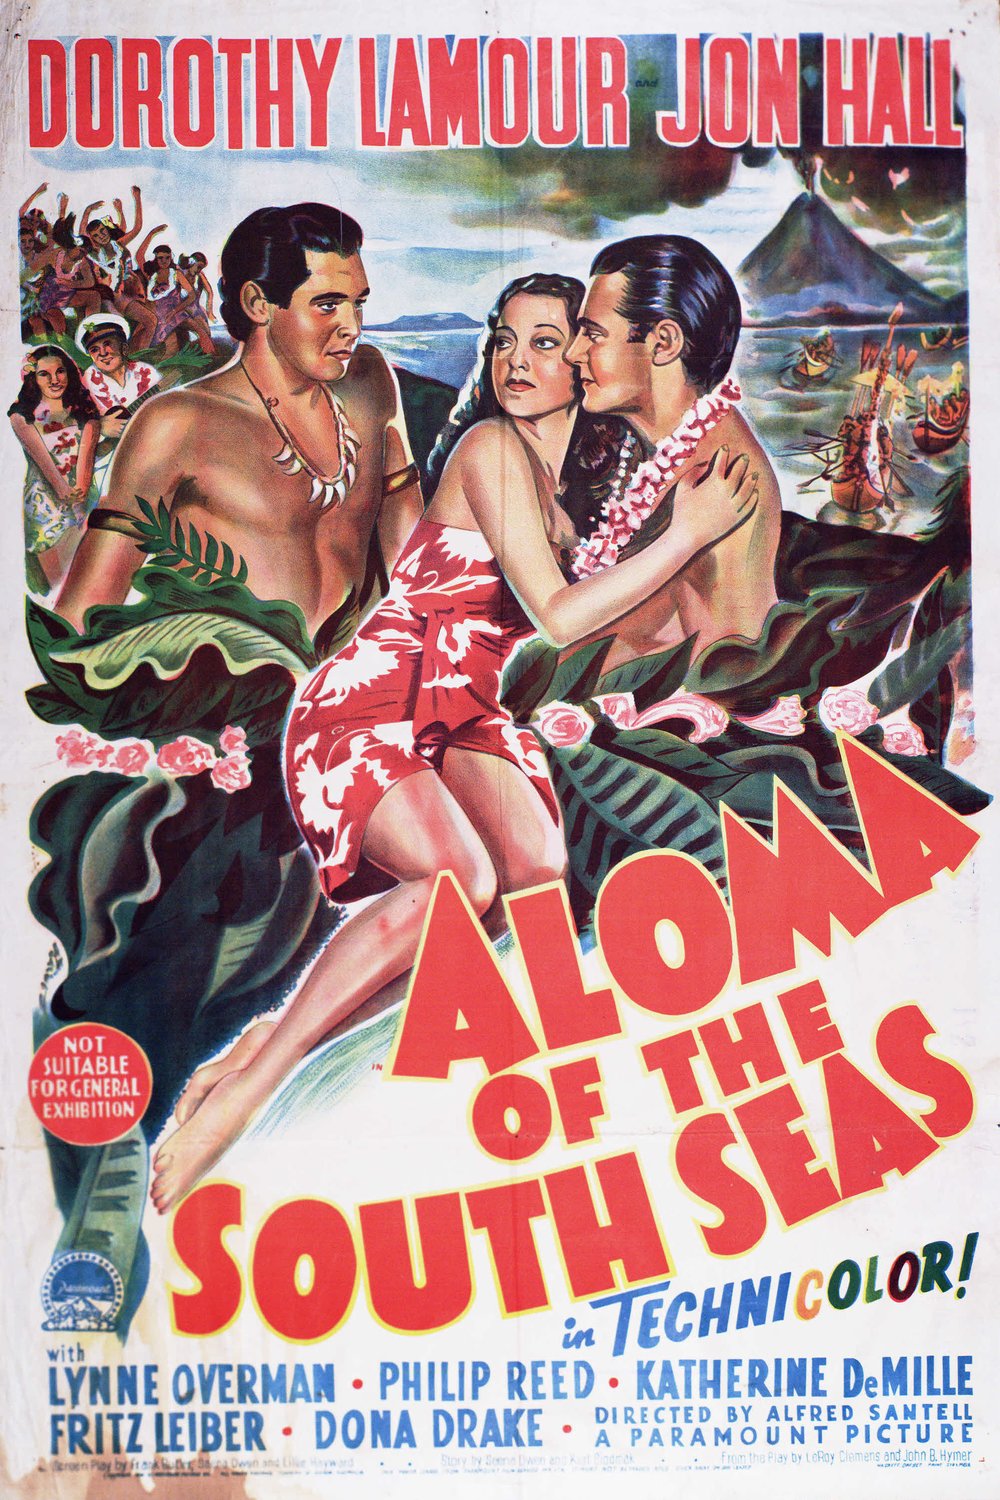 Poster of the movie Aloma of the South Seas